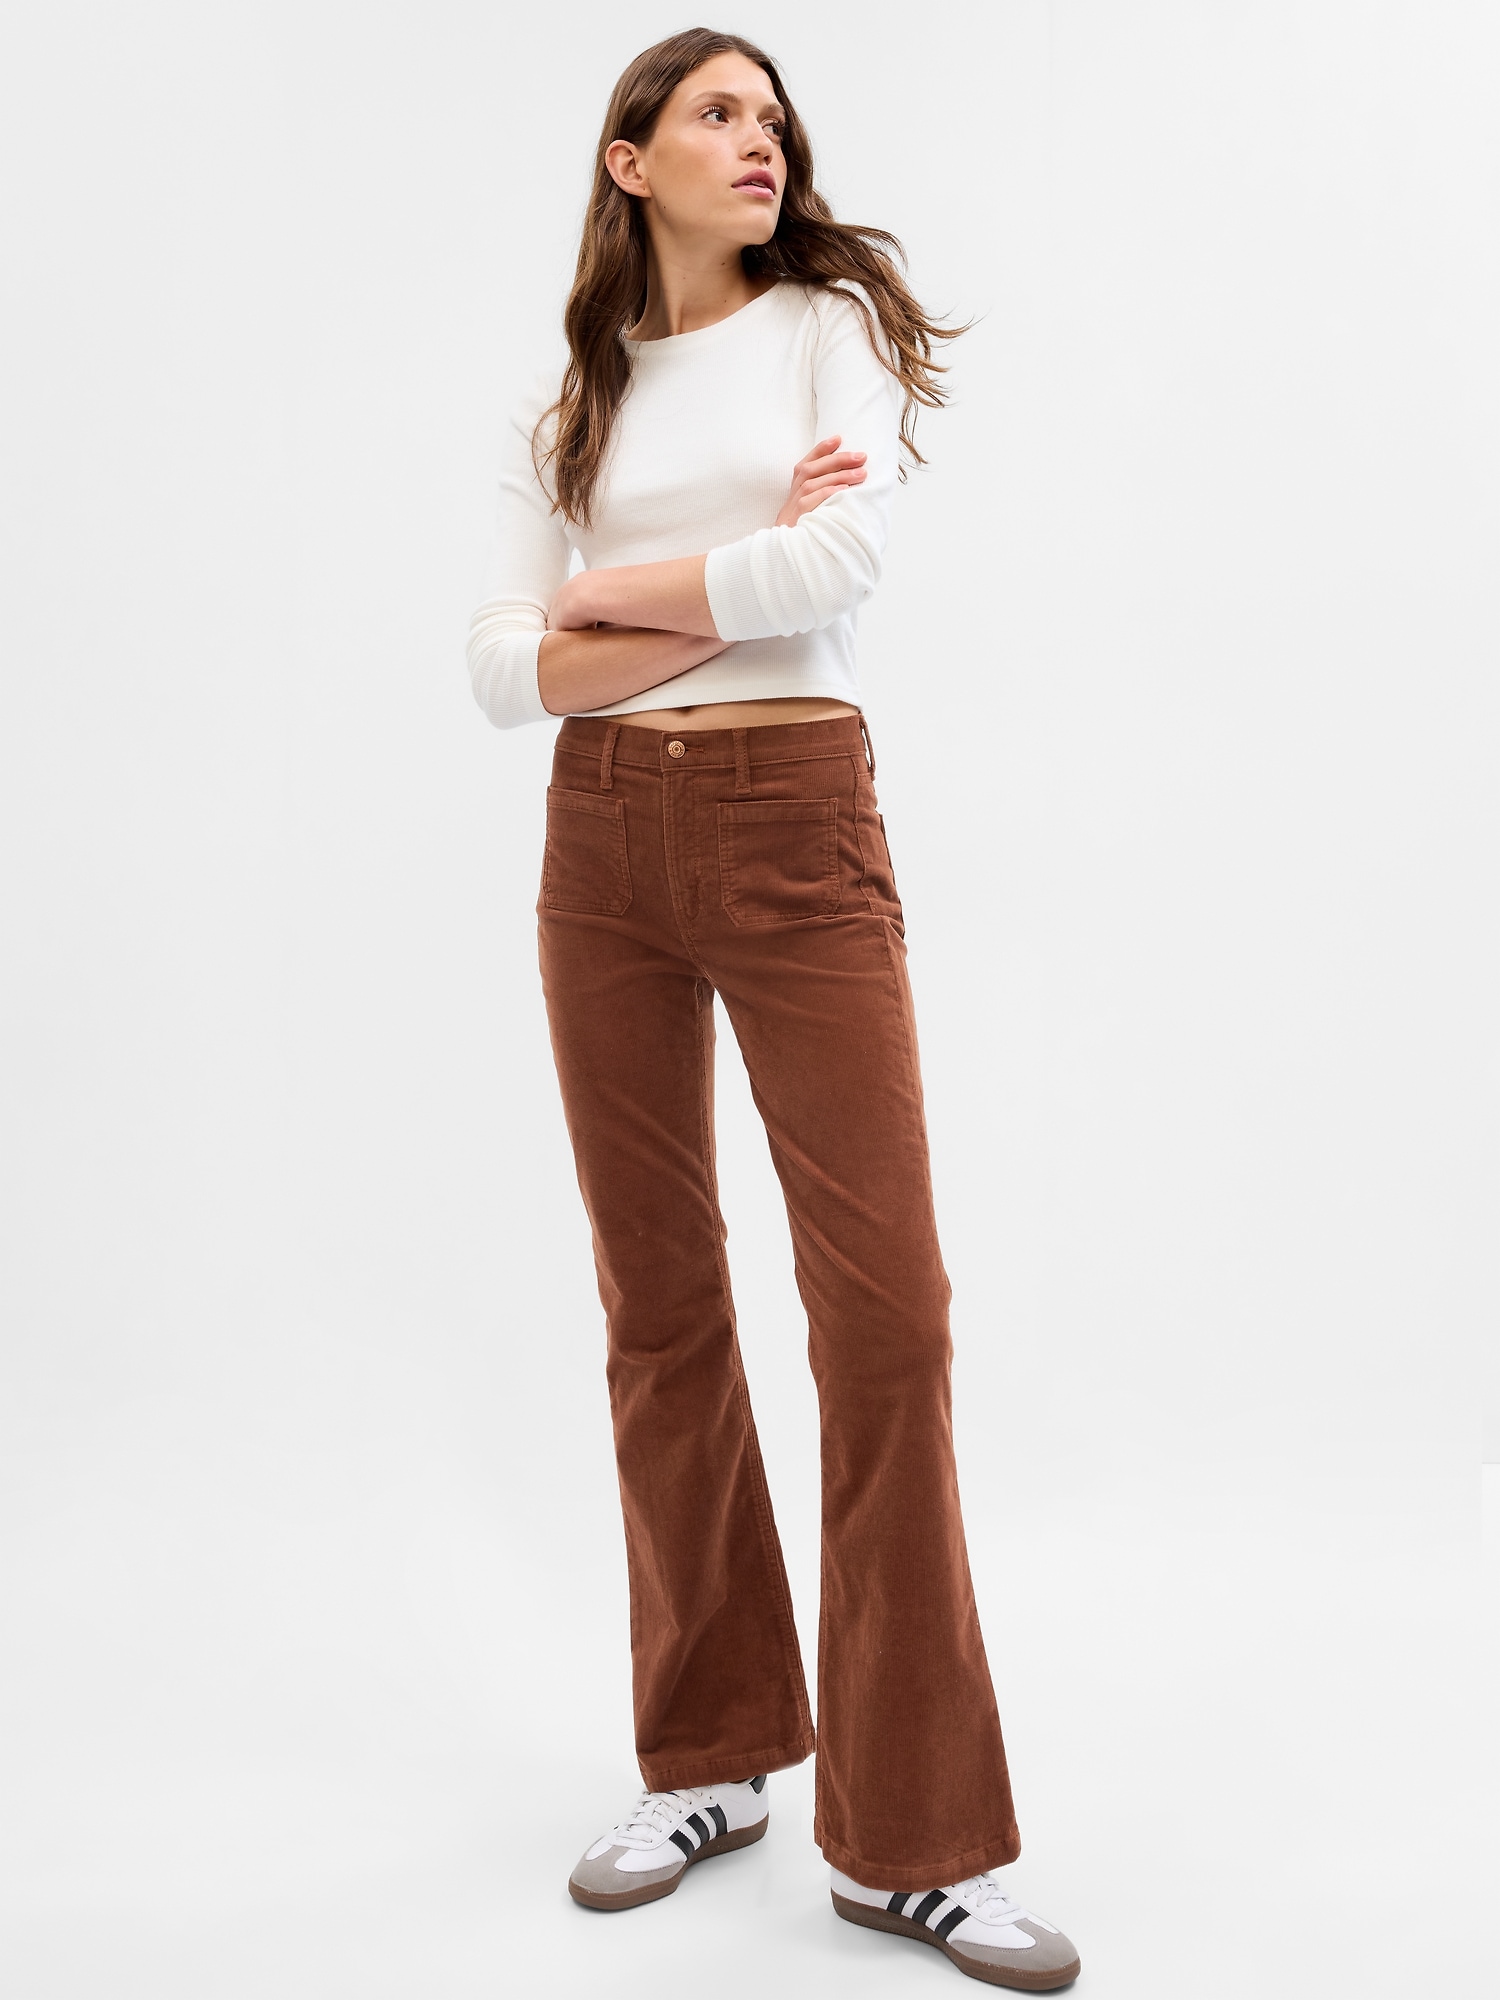 Higher High-Waisted Flare Corduroy Pants for Women